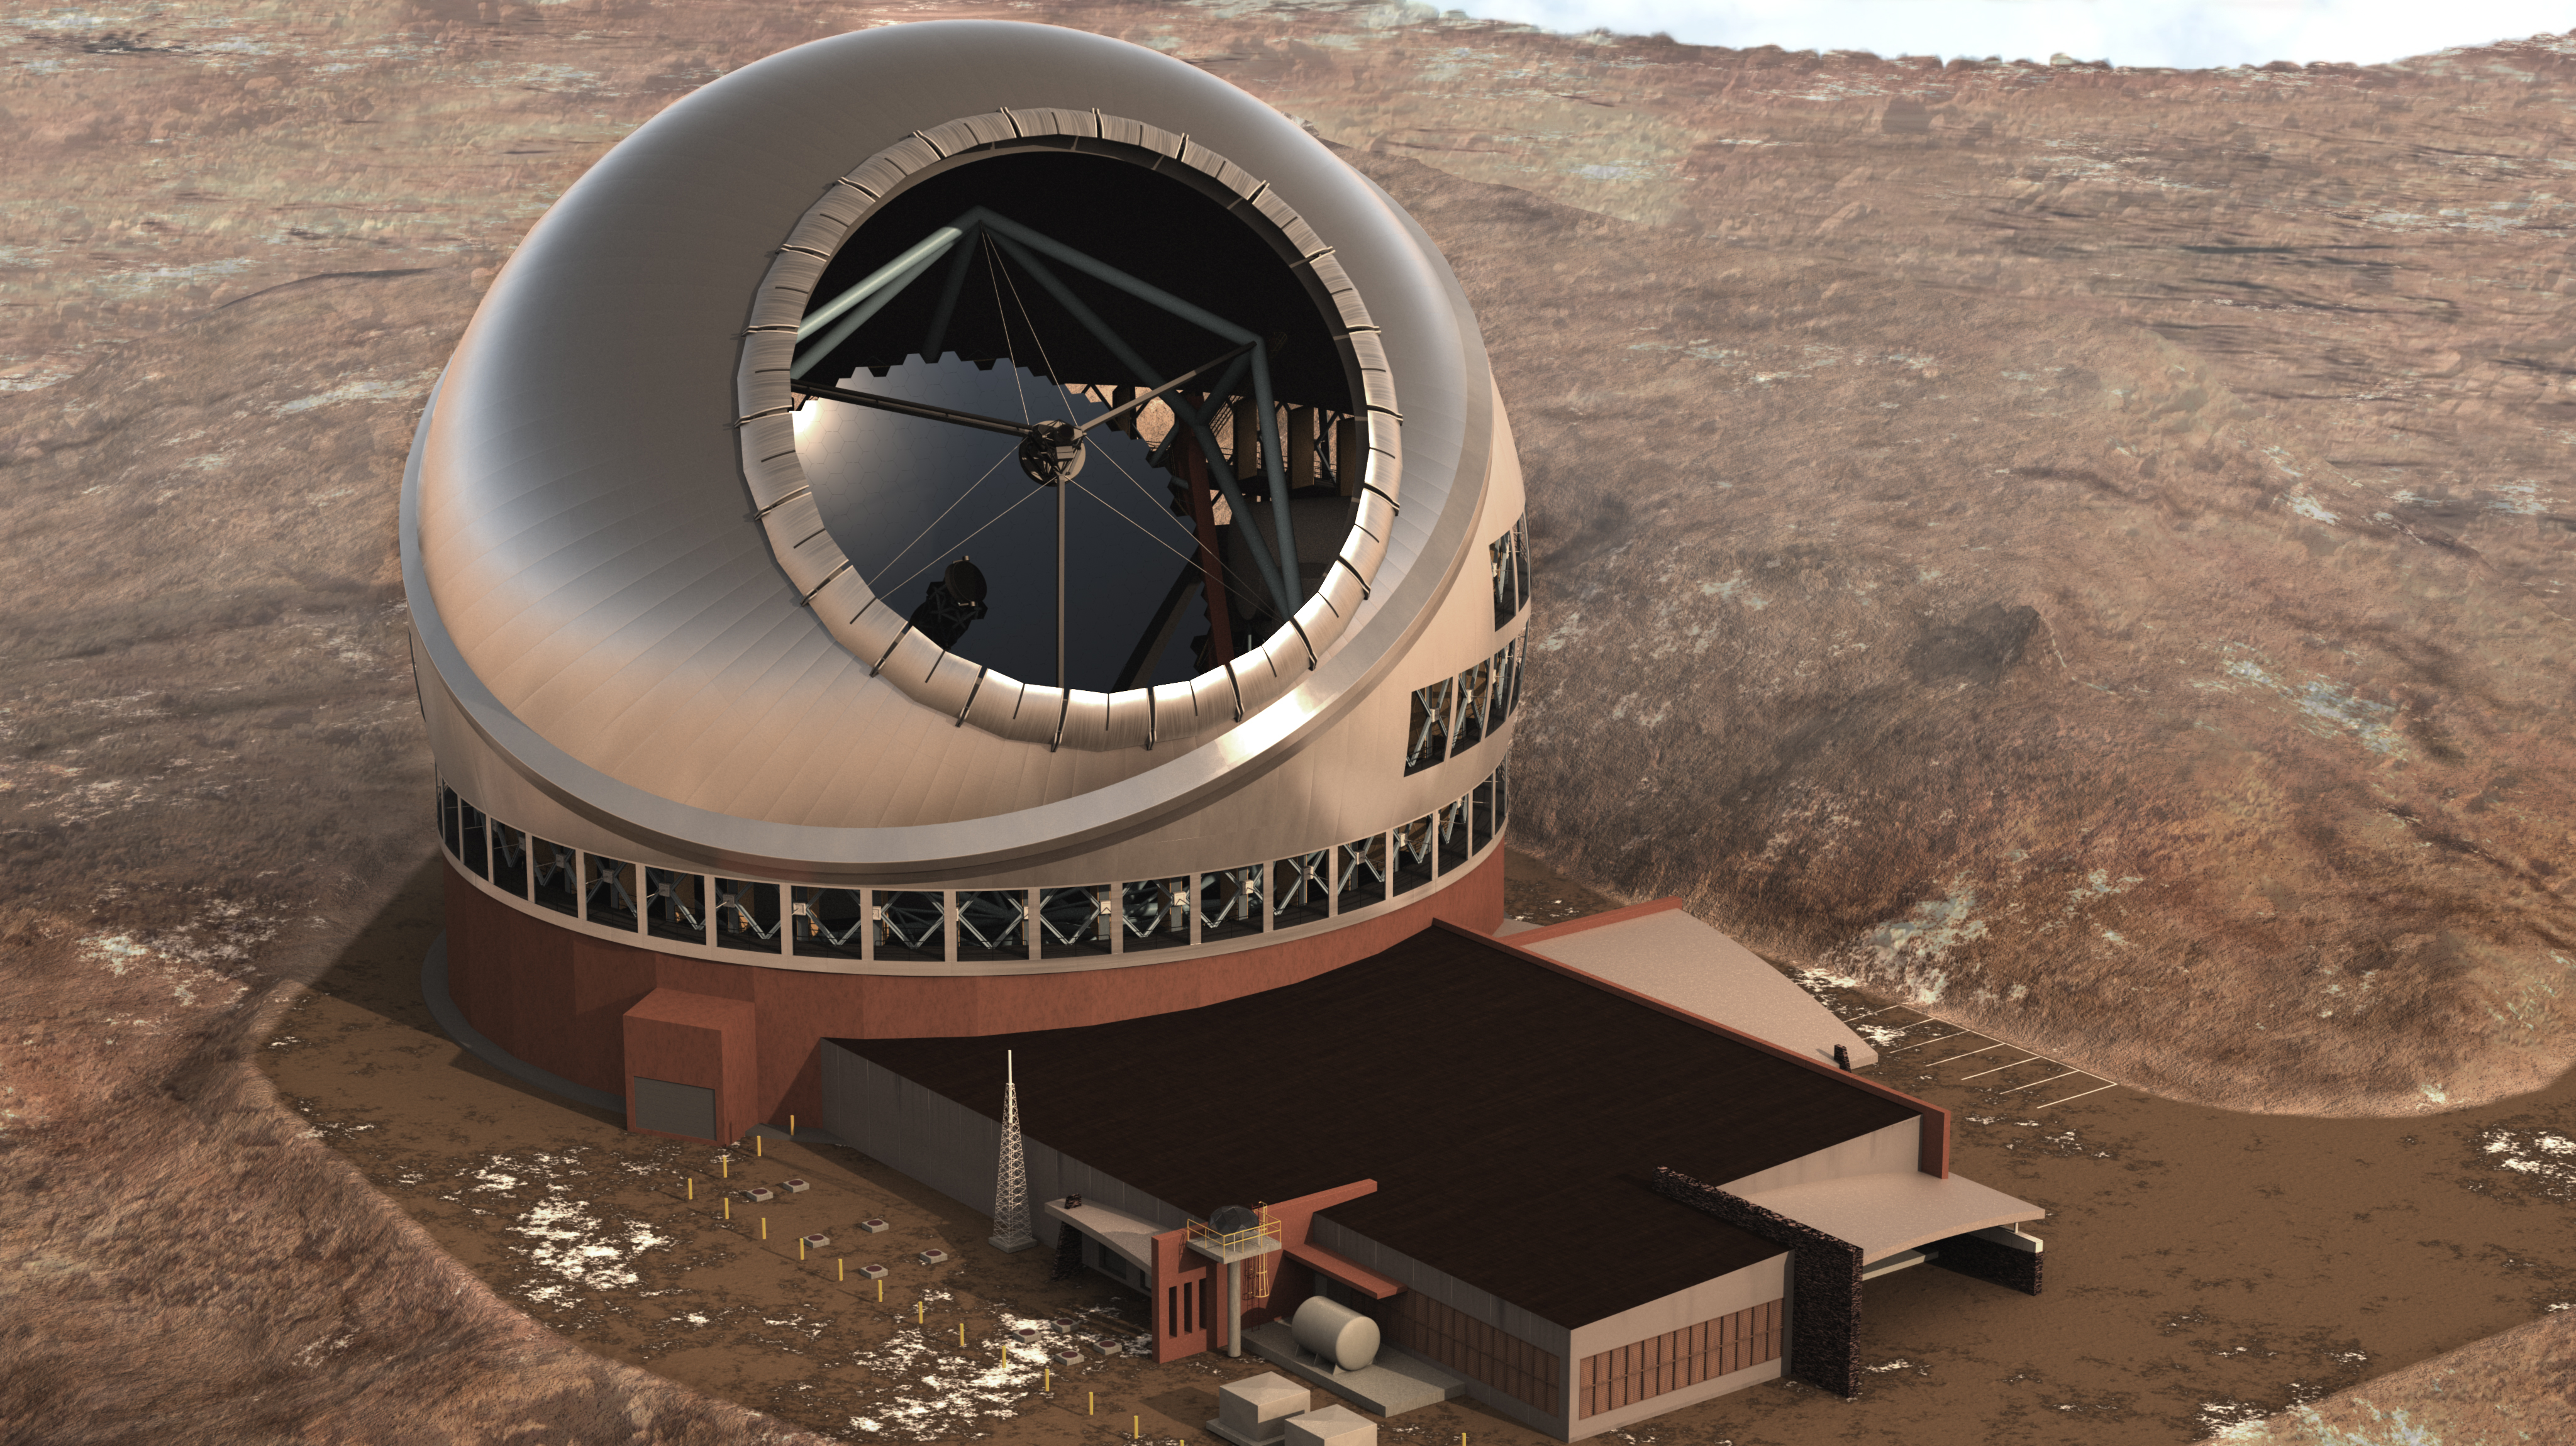 Thirty Meter Telescope given OK, but contested case granted